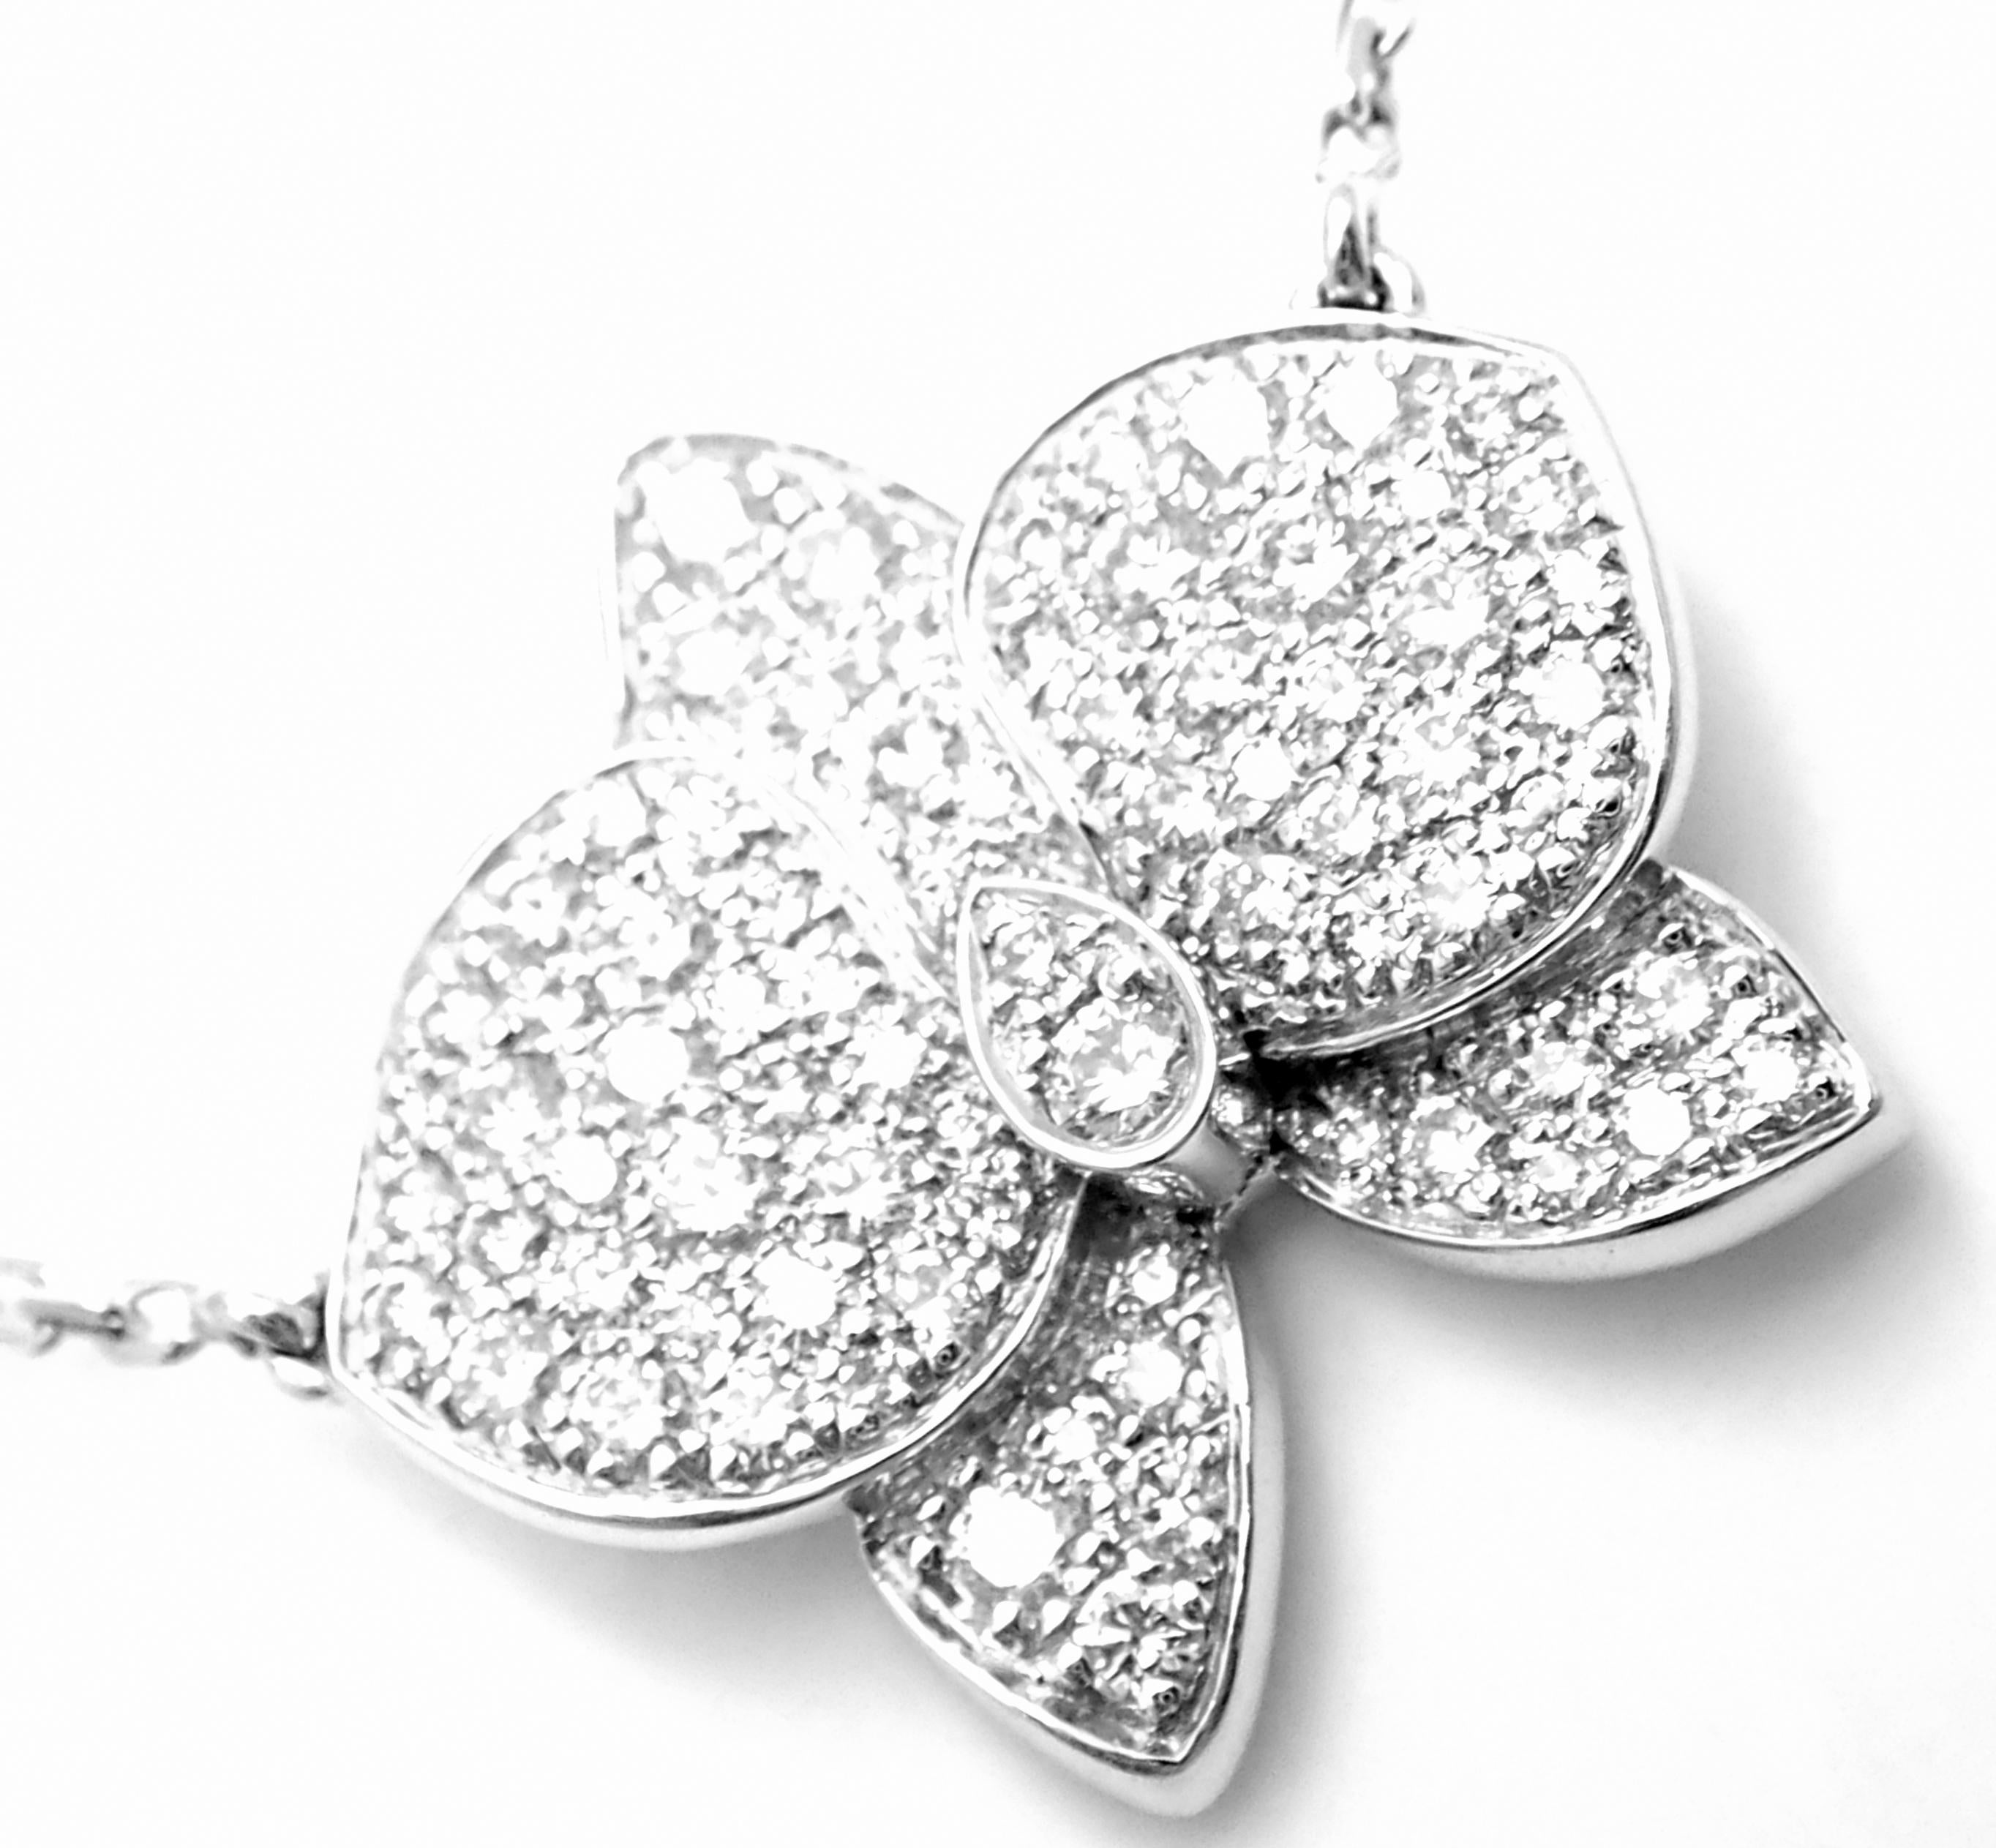 18k White Gold Caresse D'orchidées Orchid Flower Diamond Pendant Necklace by Cartier.
With 75 round brilliant cut diamonds VS1 clarity, E color total weight approx. 1.25ct
This necklace comes with original Cartier box and Cartier certificate.
This